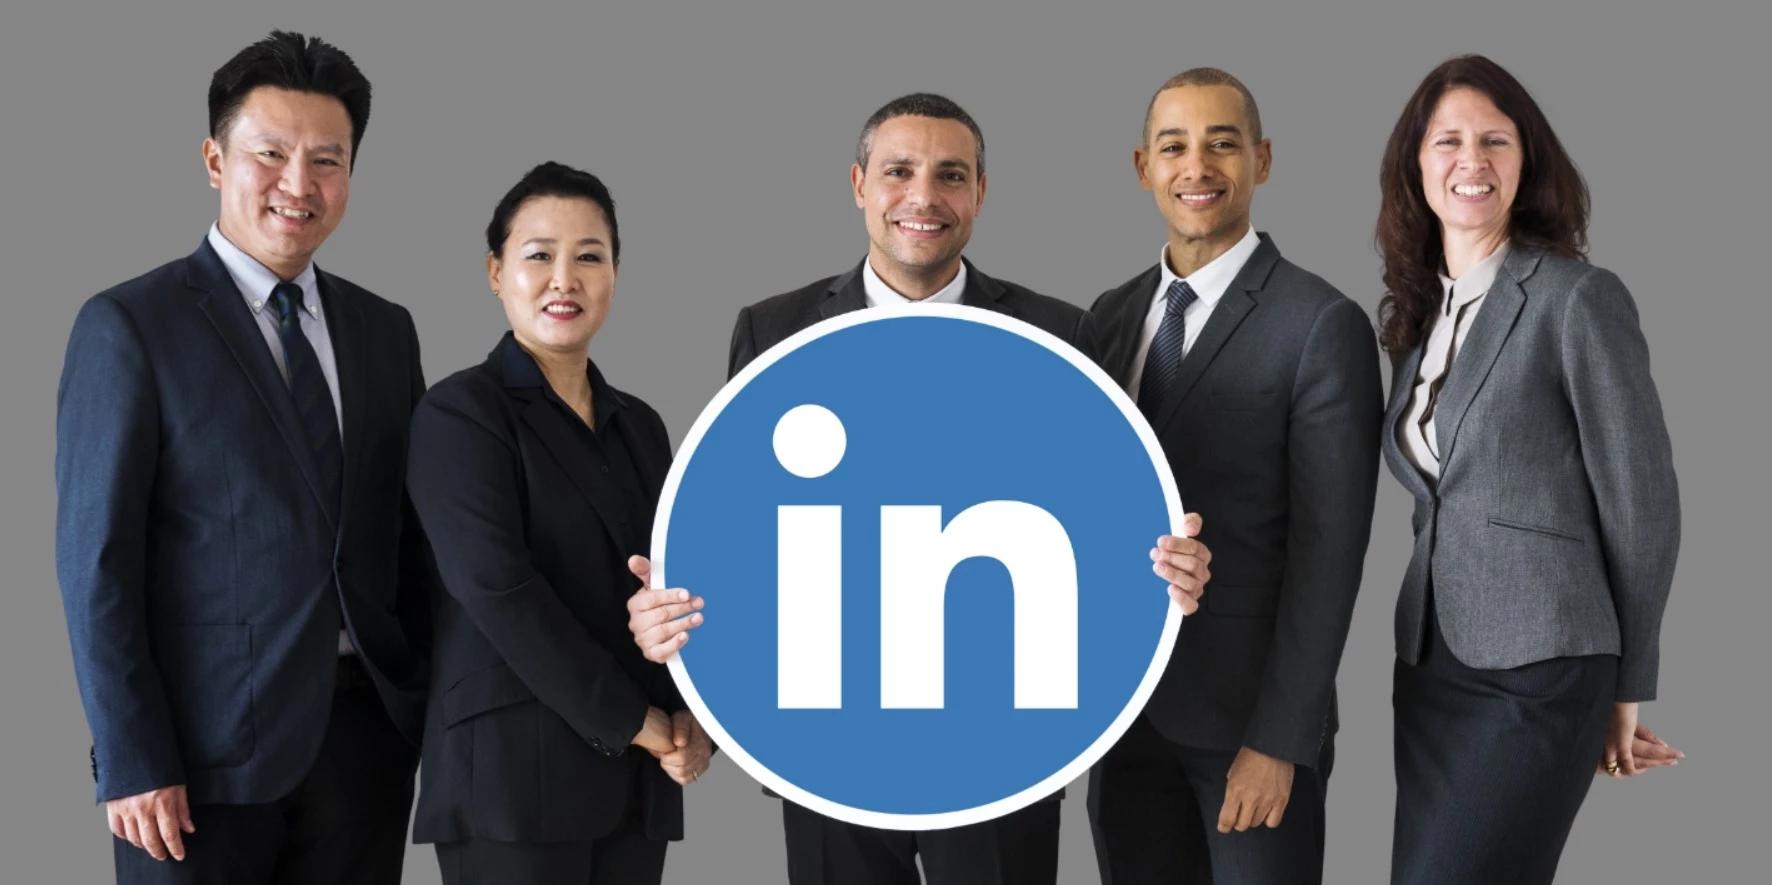 How to optimize your LinkedIn profile